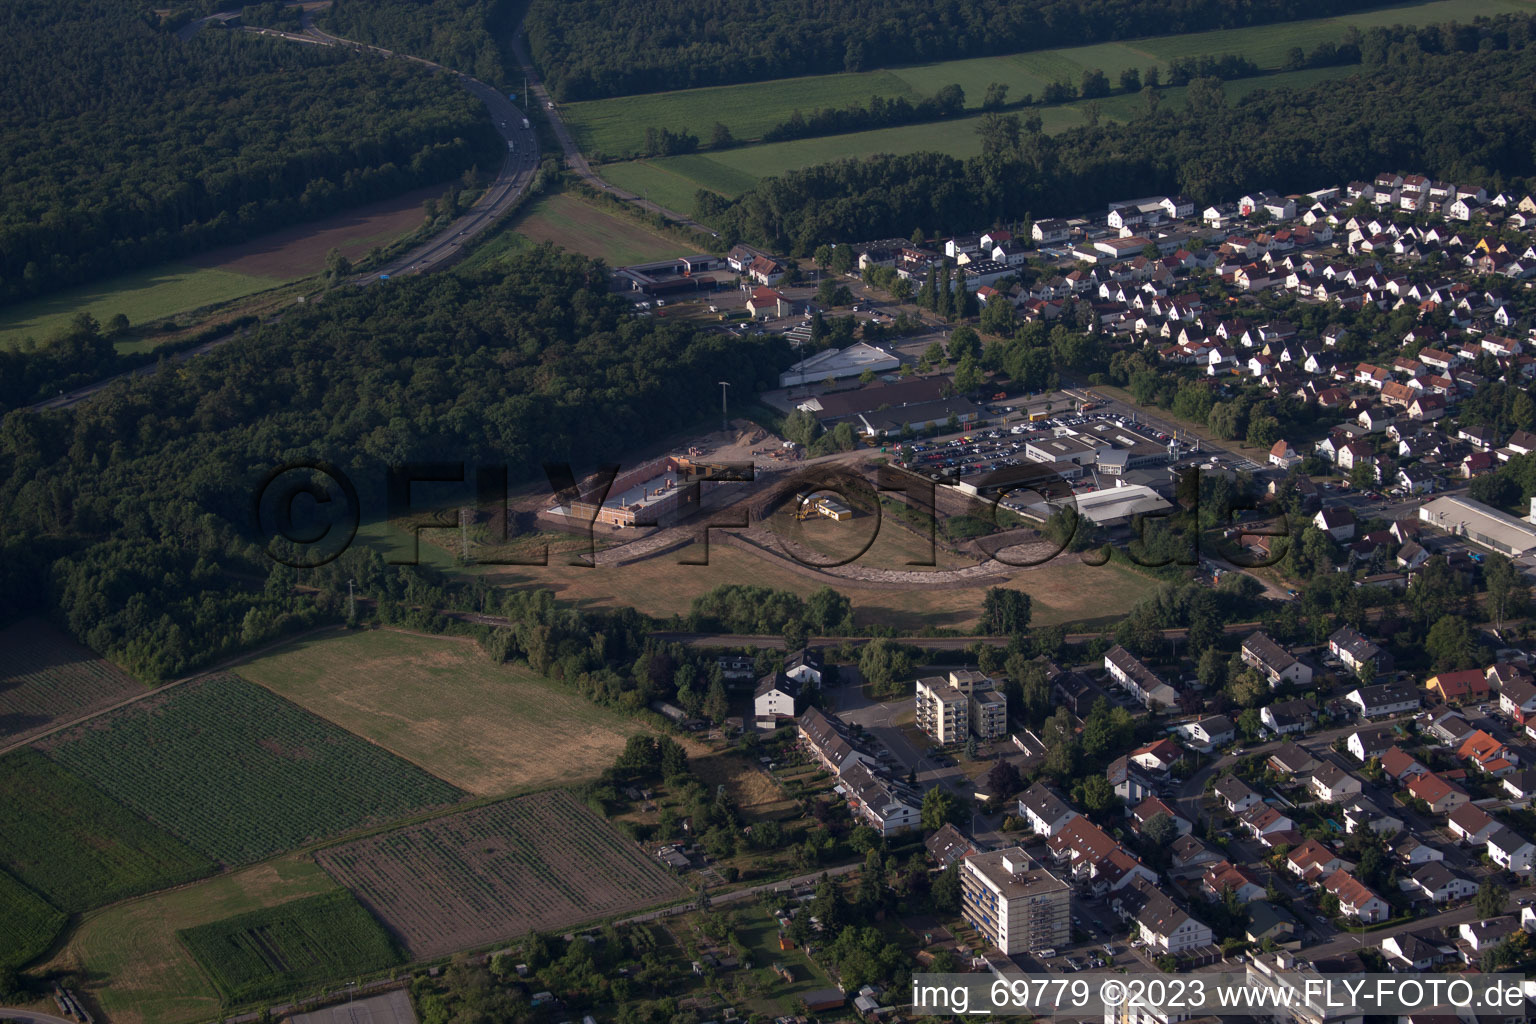 Edeka new building in Kandel in the state Rhineland-Palatinate, Germany from above